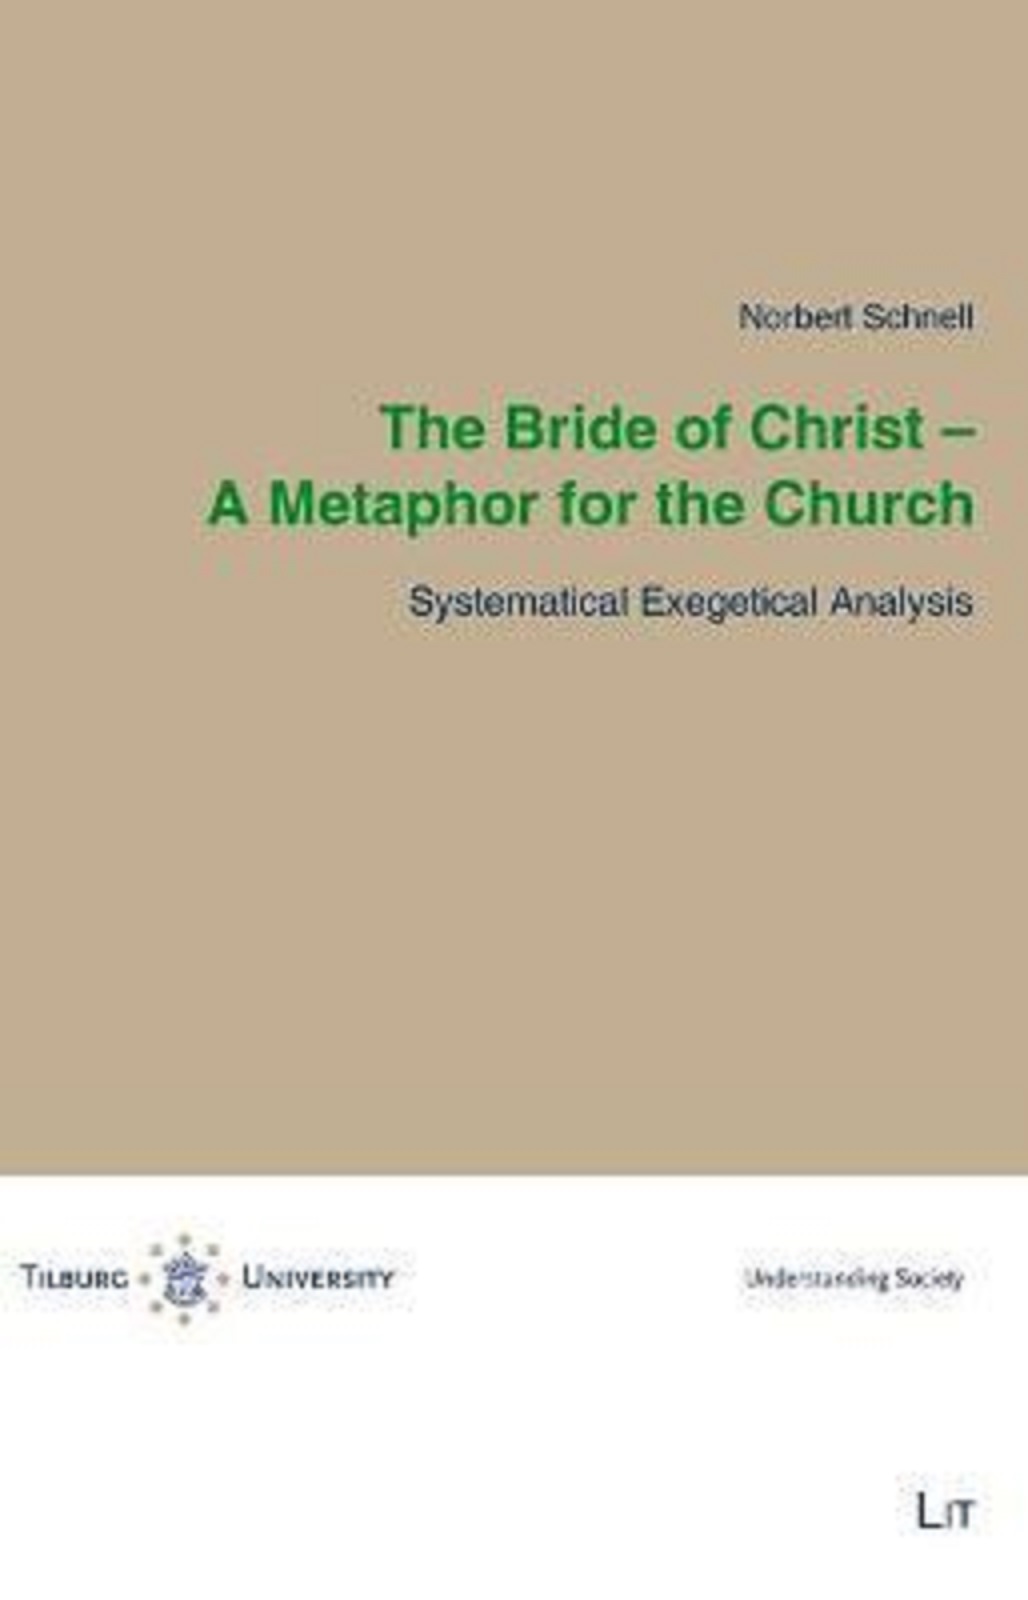 The Bride of Christ - A Metaphor for the Church